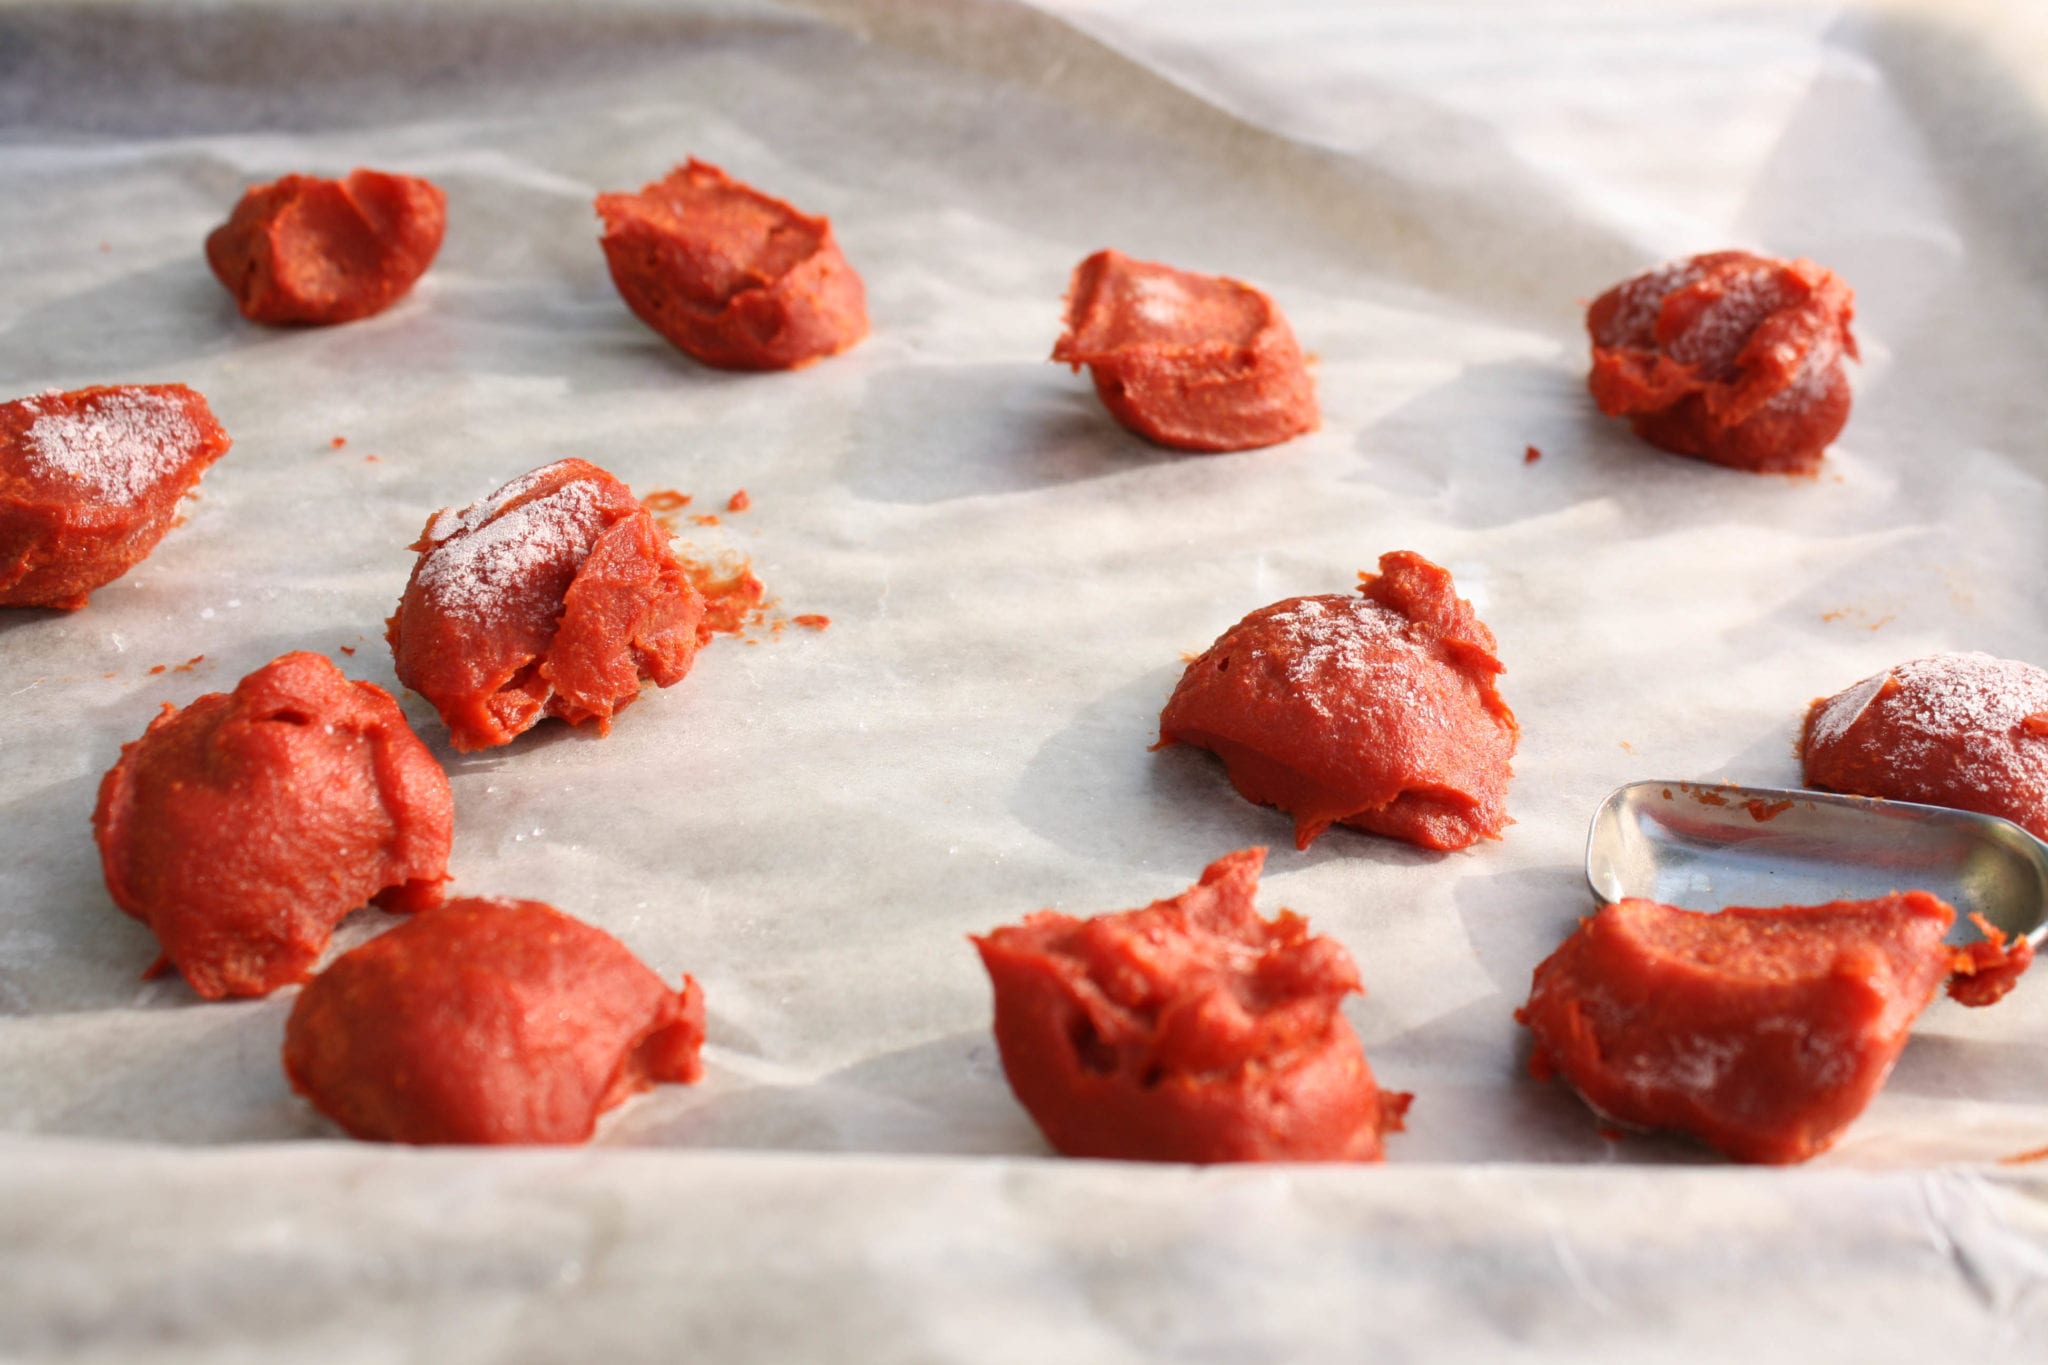 Frozen spoonfuls of tomato paste on parchment paper.